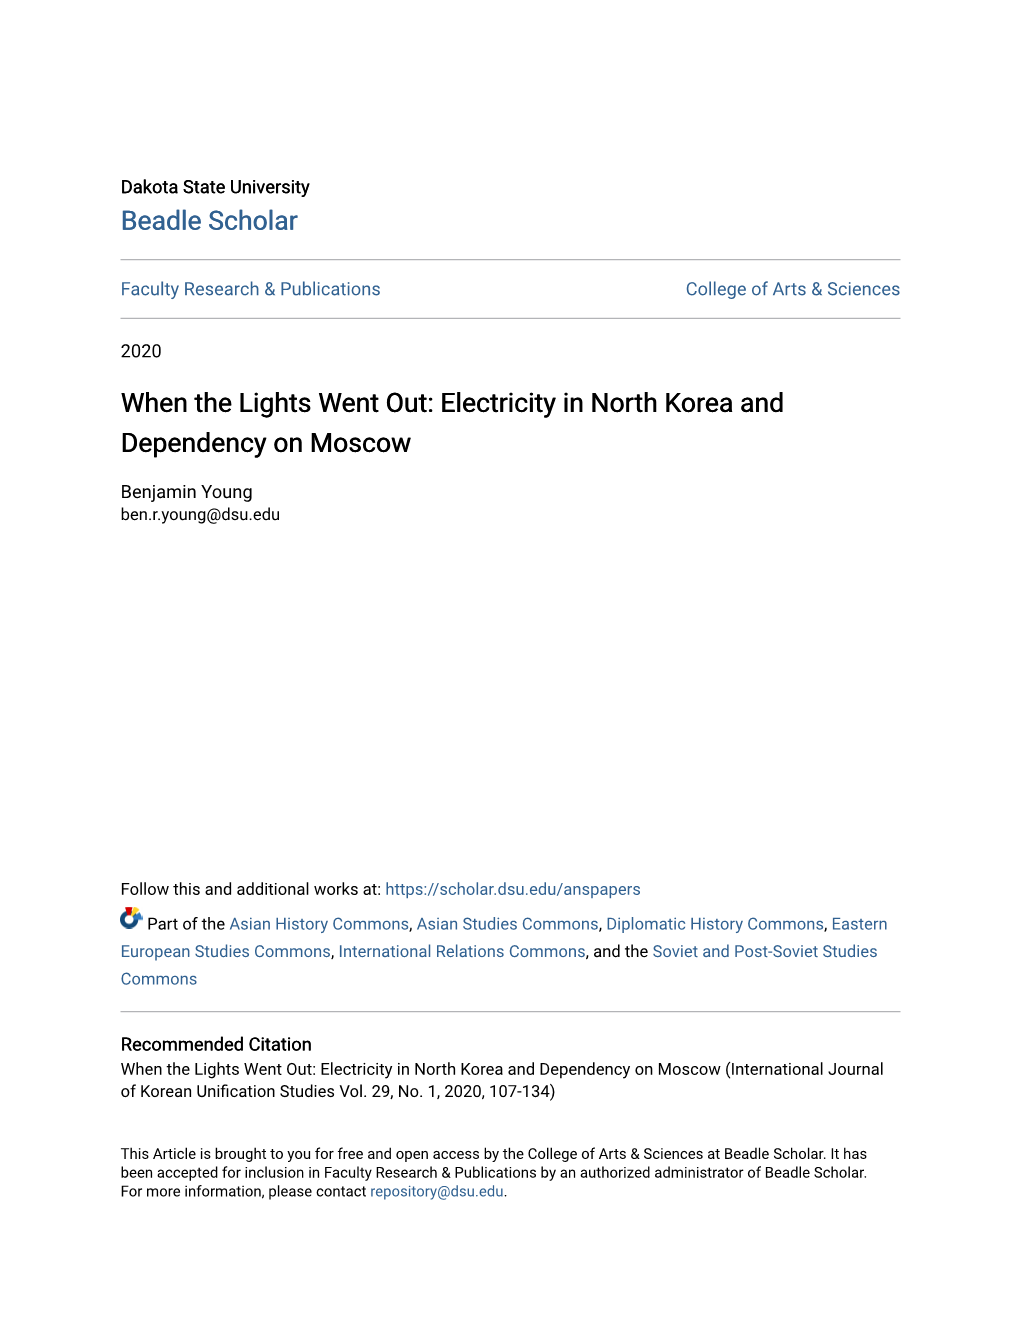 When the Lights Went Out: Electricity in North Korea and Dependency on Moscow